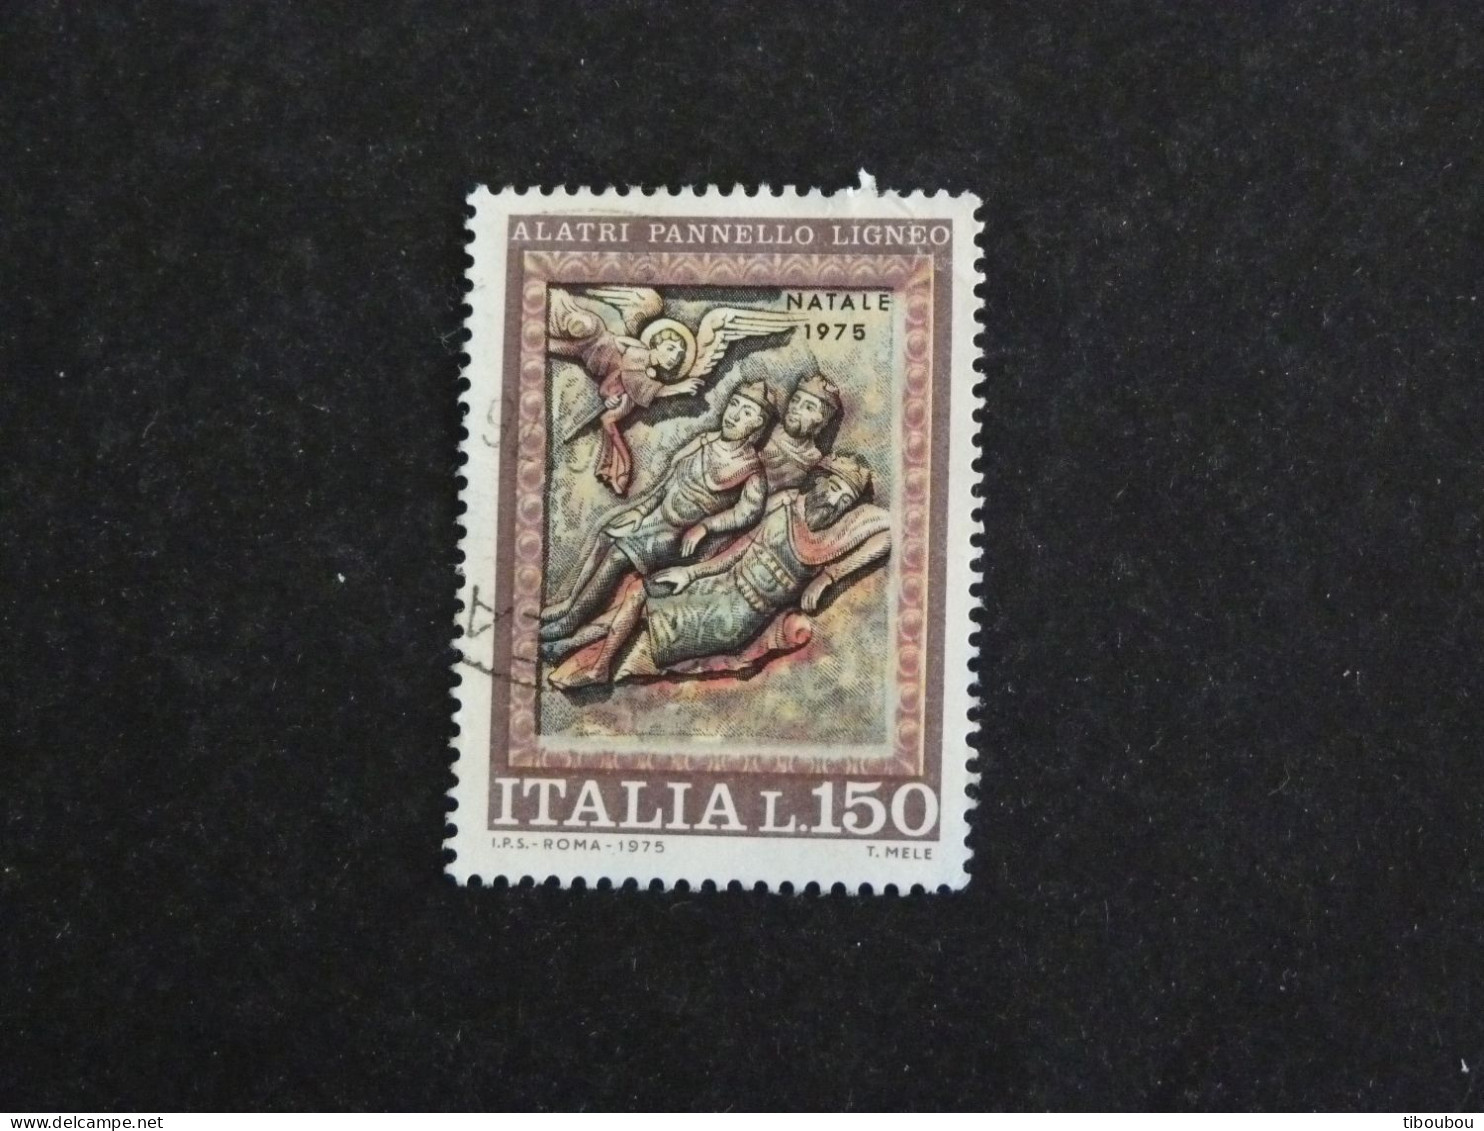 ITALIE ITALIA YT 1248 OBLITERE - NOEL CHRISTMAS / ANNONCIATION AUX MAGES - 1971-80: Gebraucht